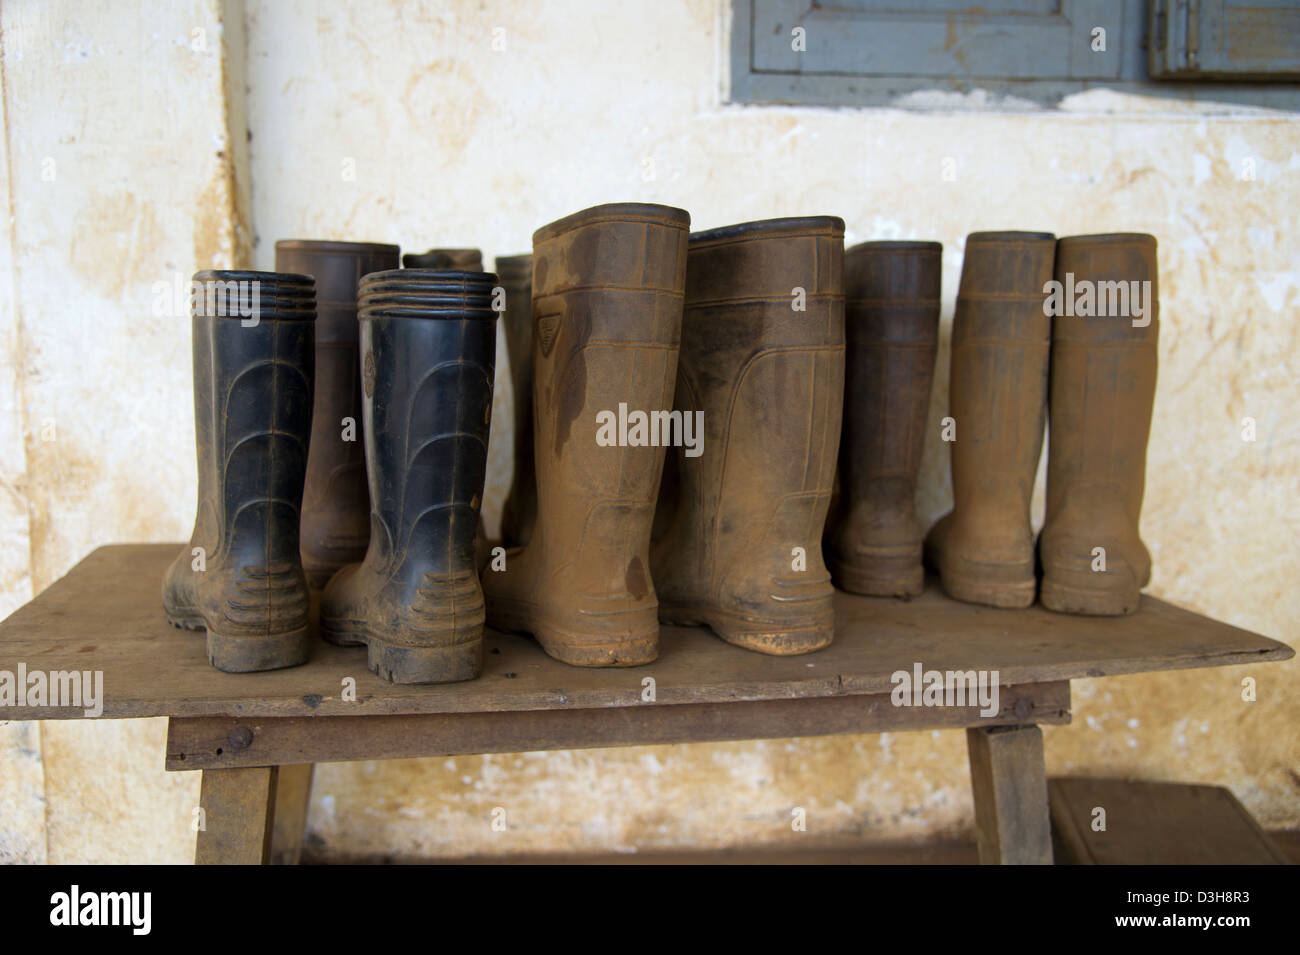 Rubber boots covered in mud sit in rows on a wooden table Stock Photo